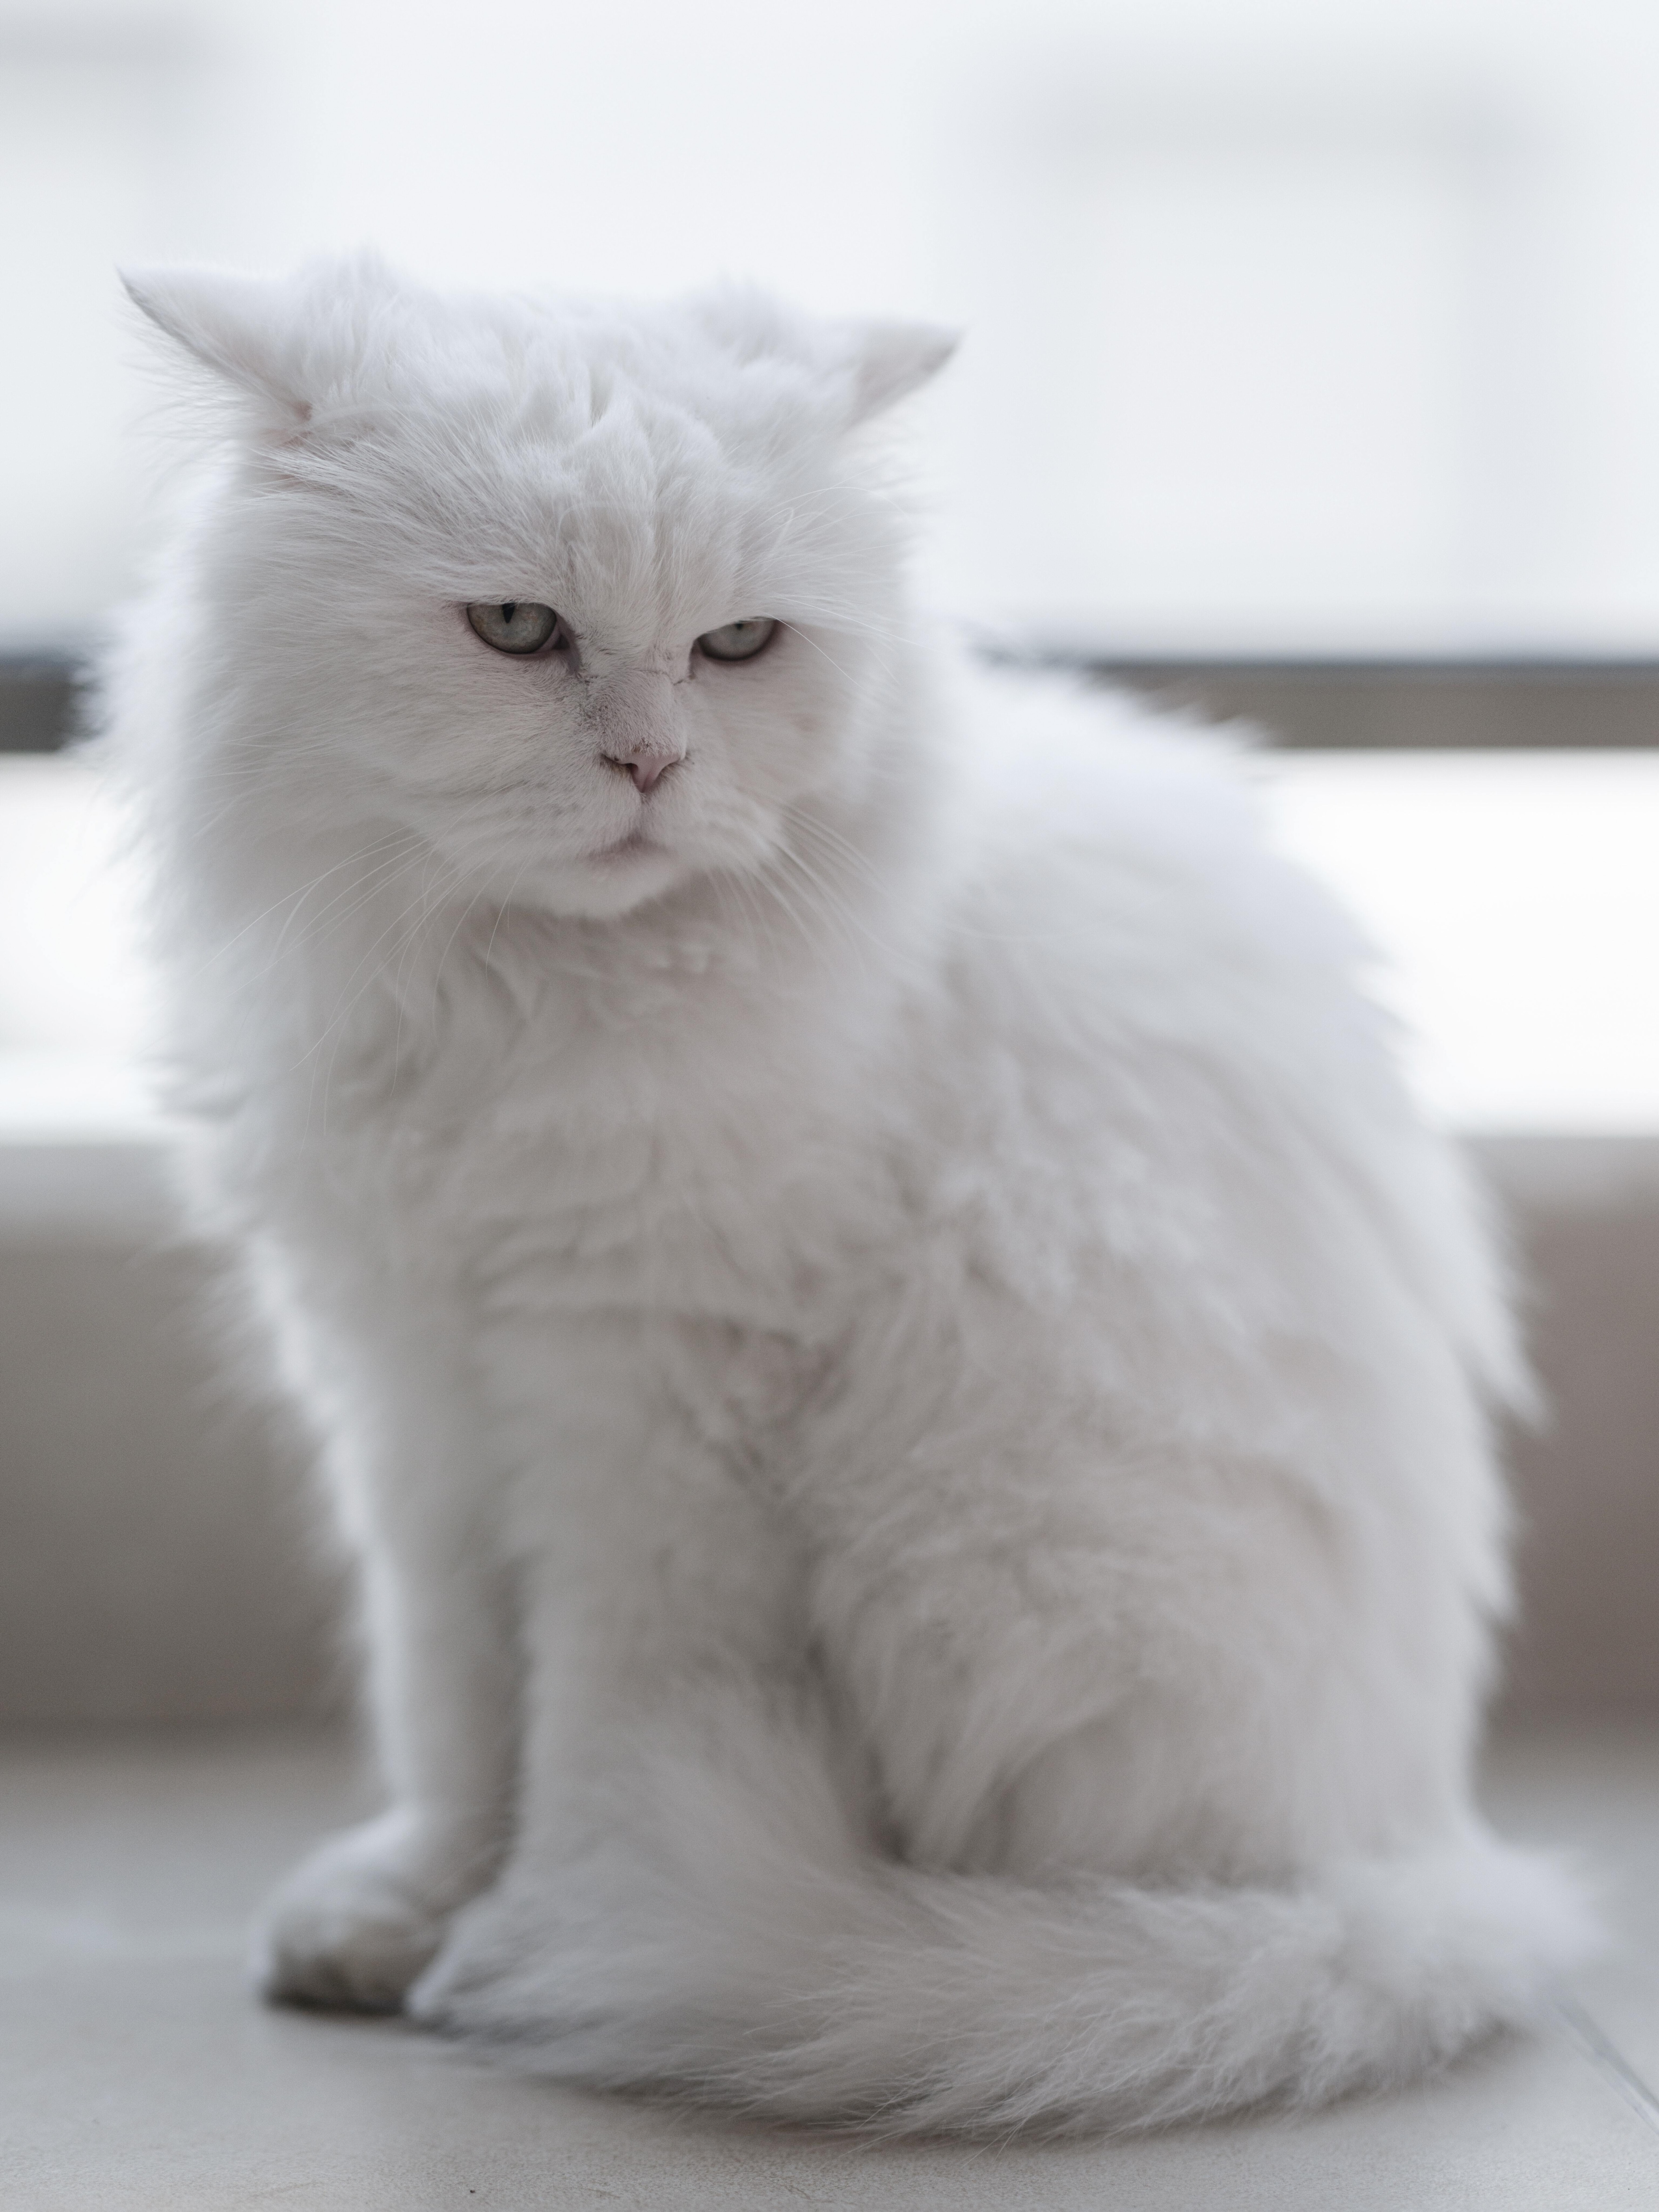 The Persian cat is a popular cat breed worldwide.  It becomes more attractive and beautiful thanks to its attractiveness and fluffy coat (pexels).